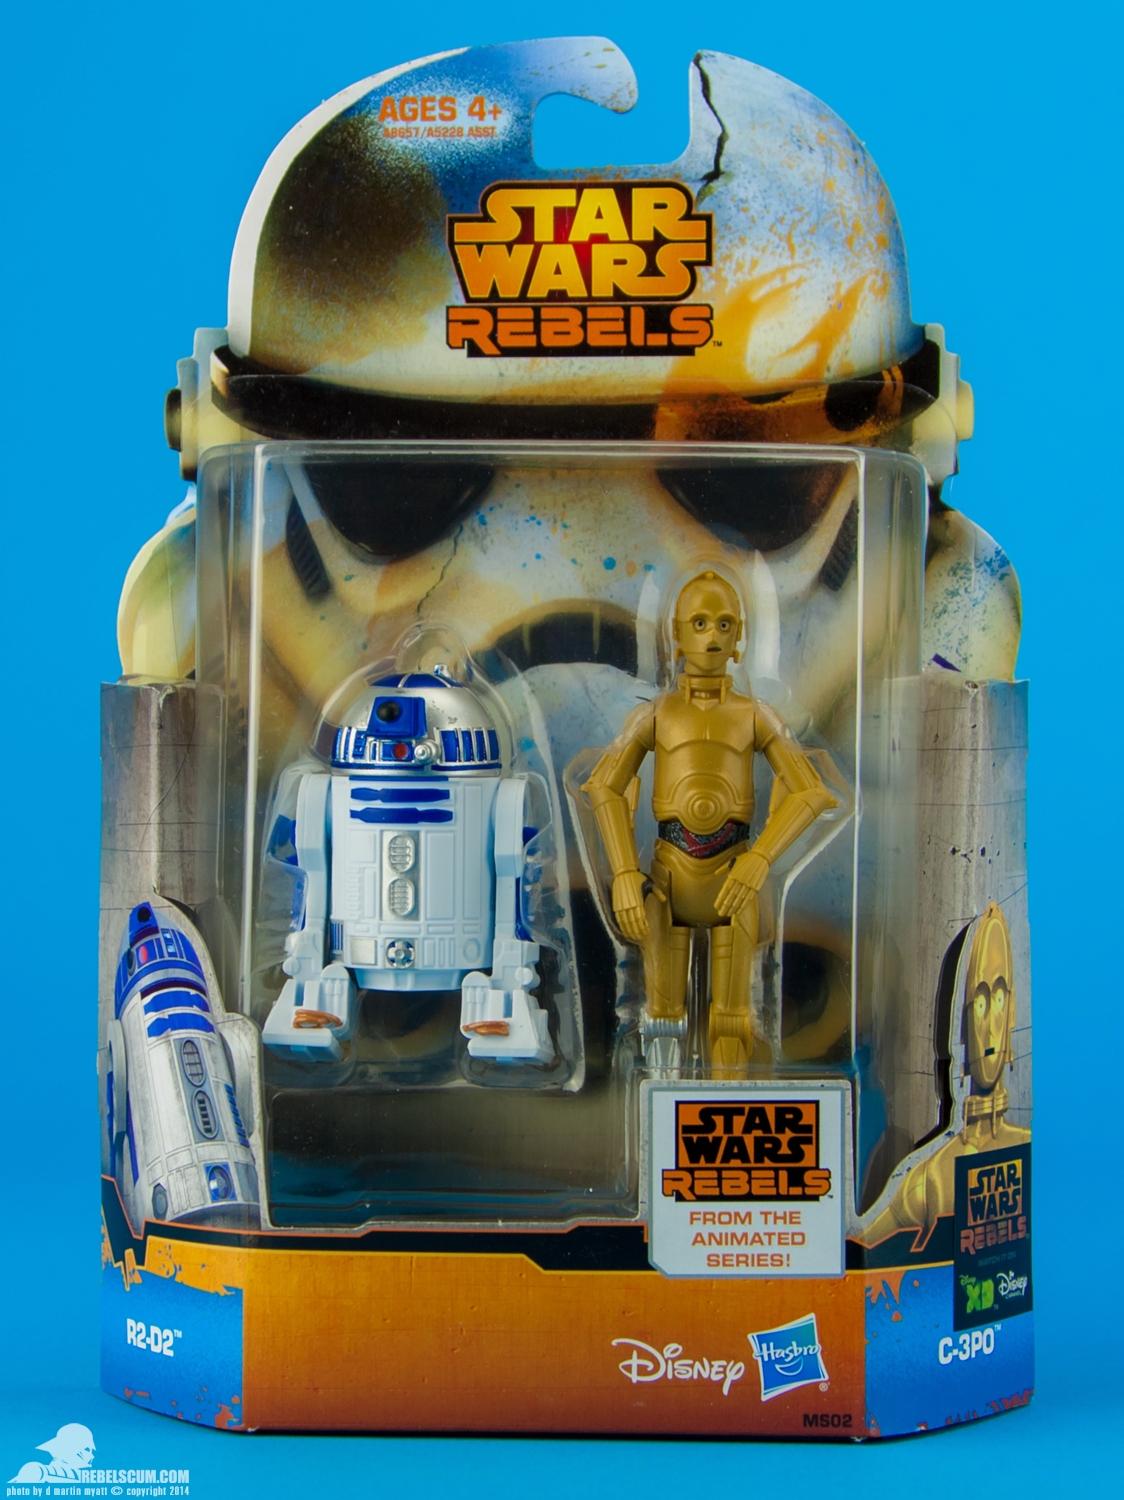 MS02-Rebels-Mission-Series-C-3PO-and-R2-D2-014.jpg